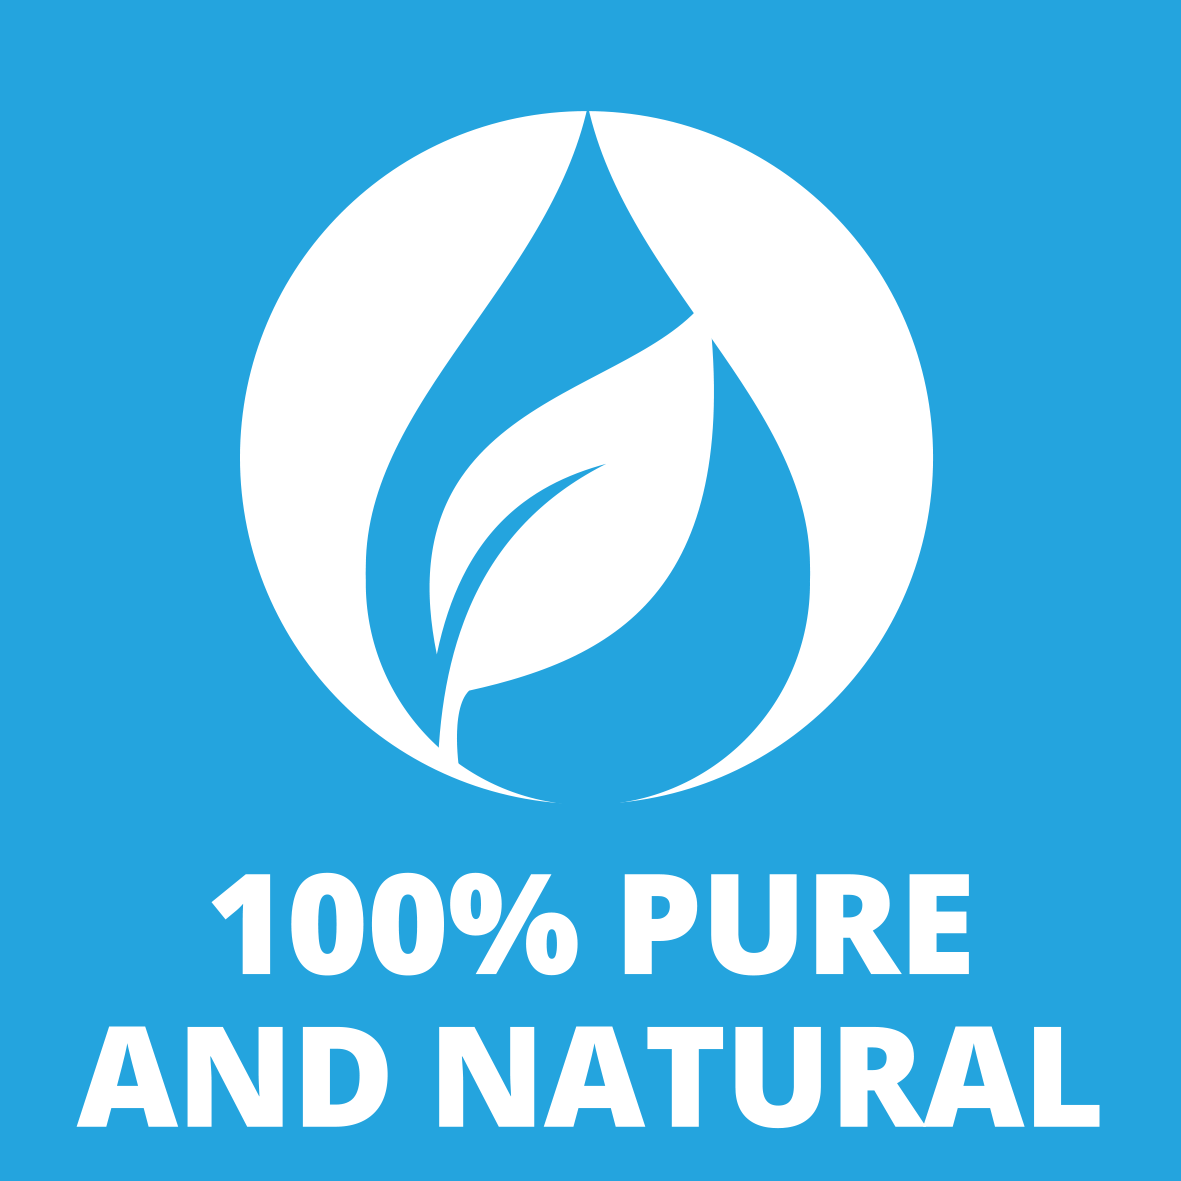 100% pure and natural